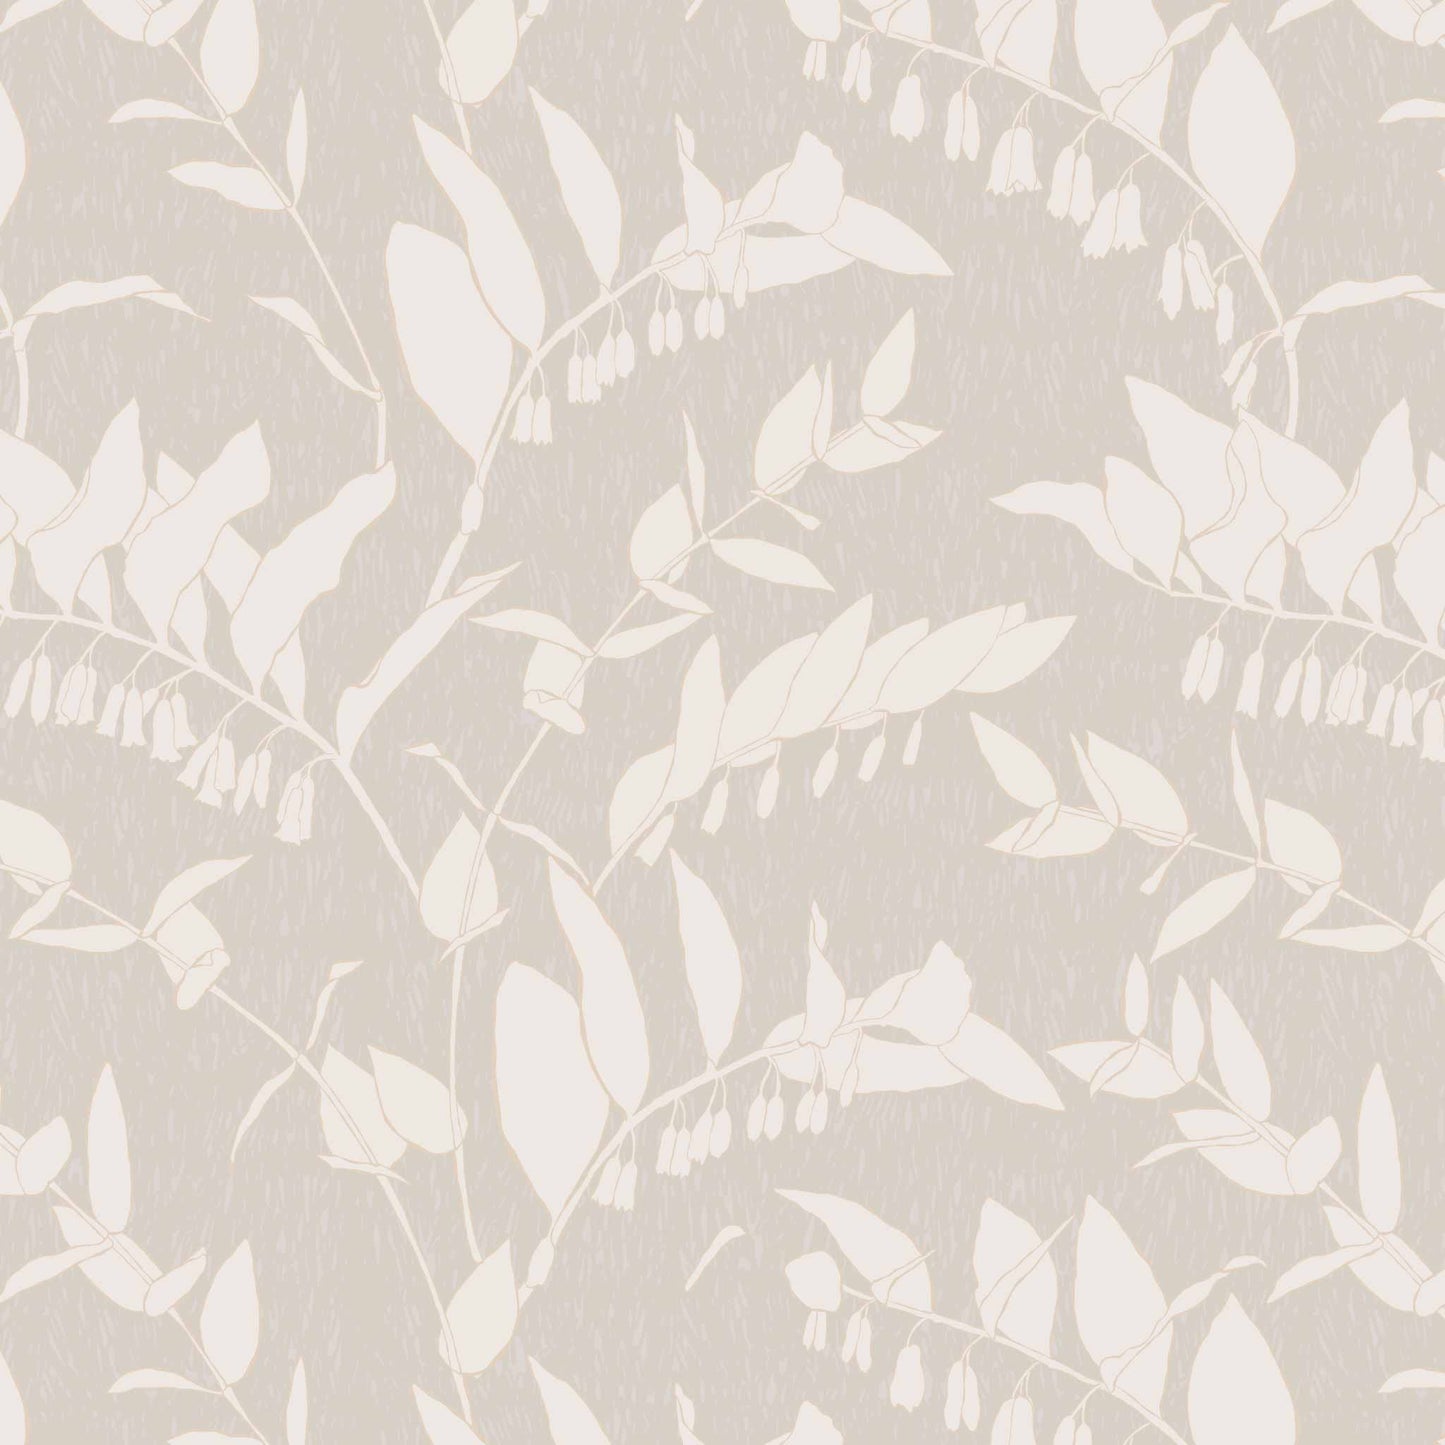 Vines Wallpaper in Neutral adds an appreciation of understated chicness to any interior, offering a funky and moody essence to any space it graces